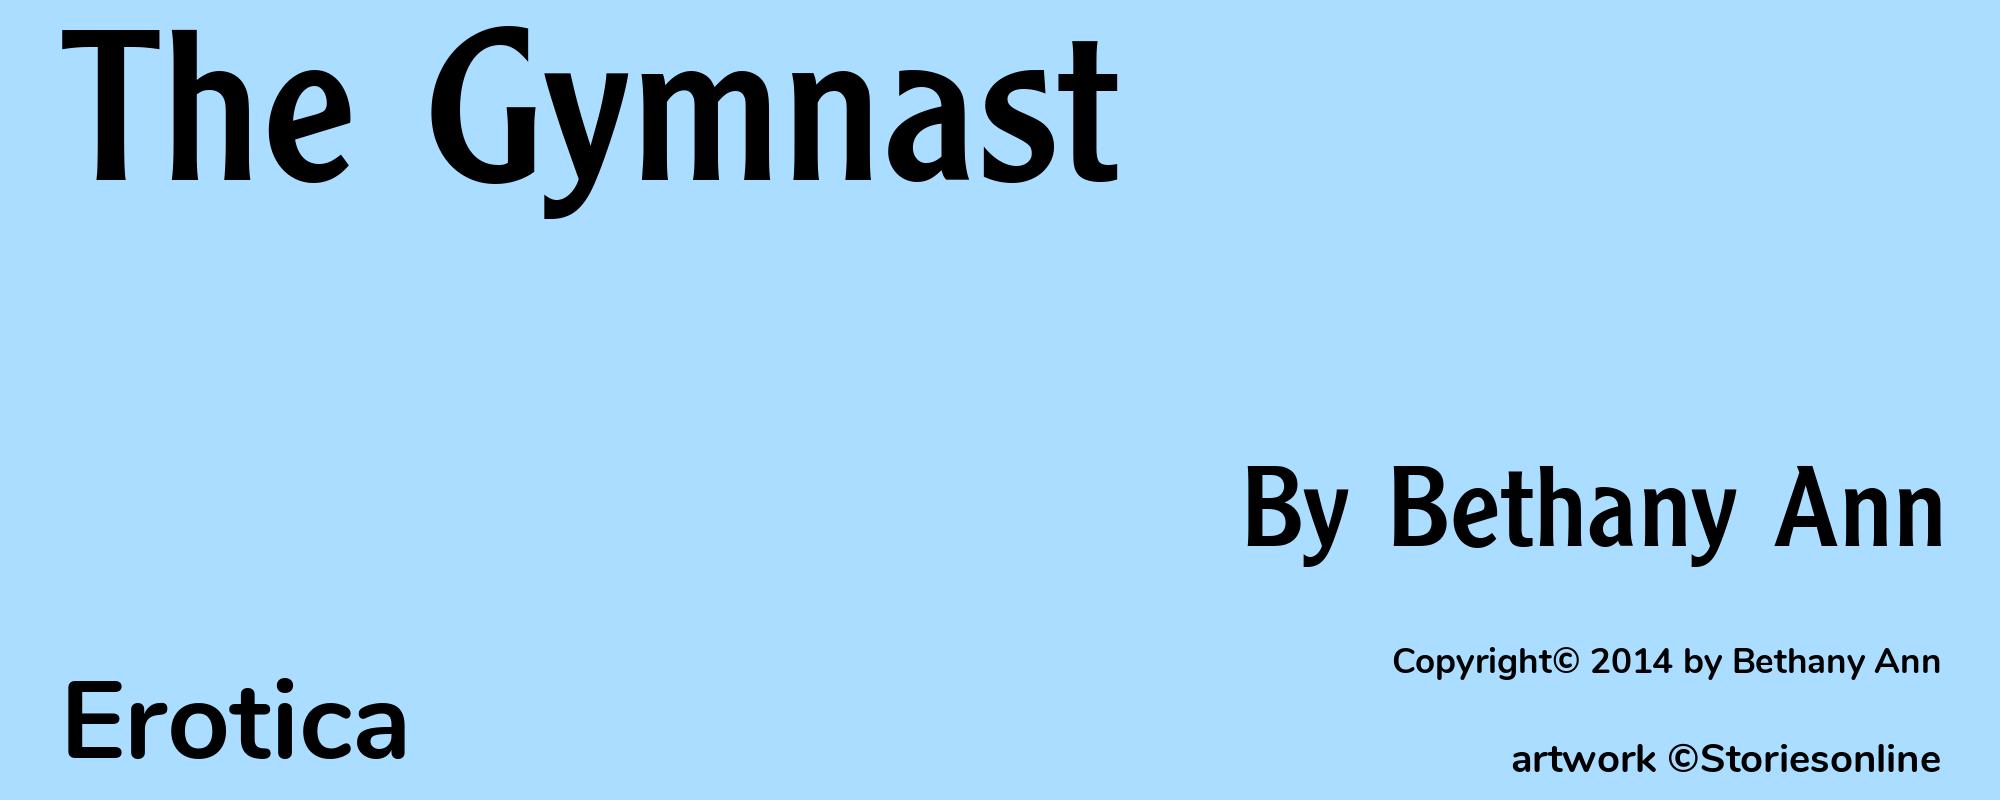 The Gymnast - Cover